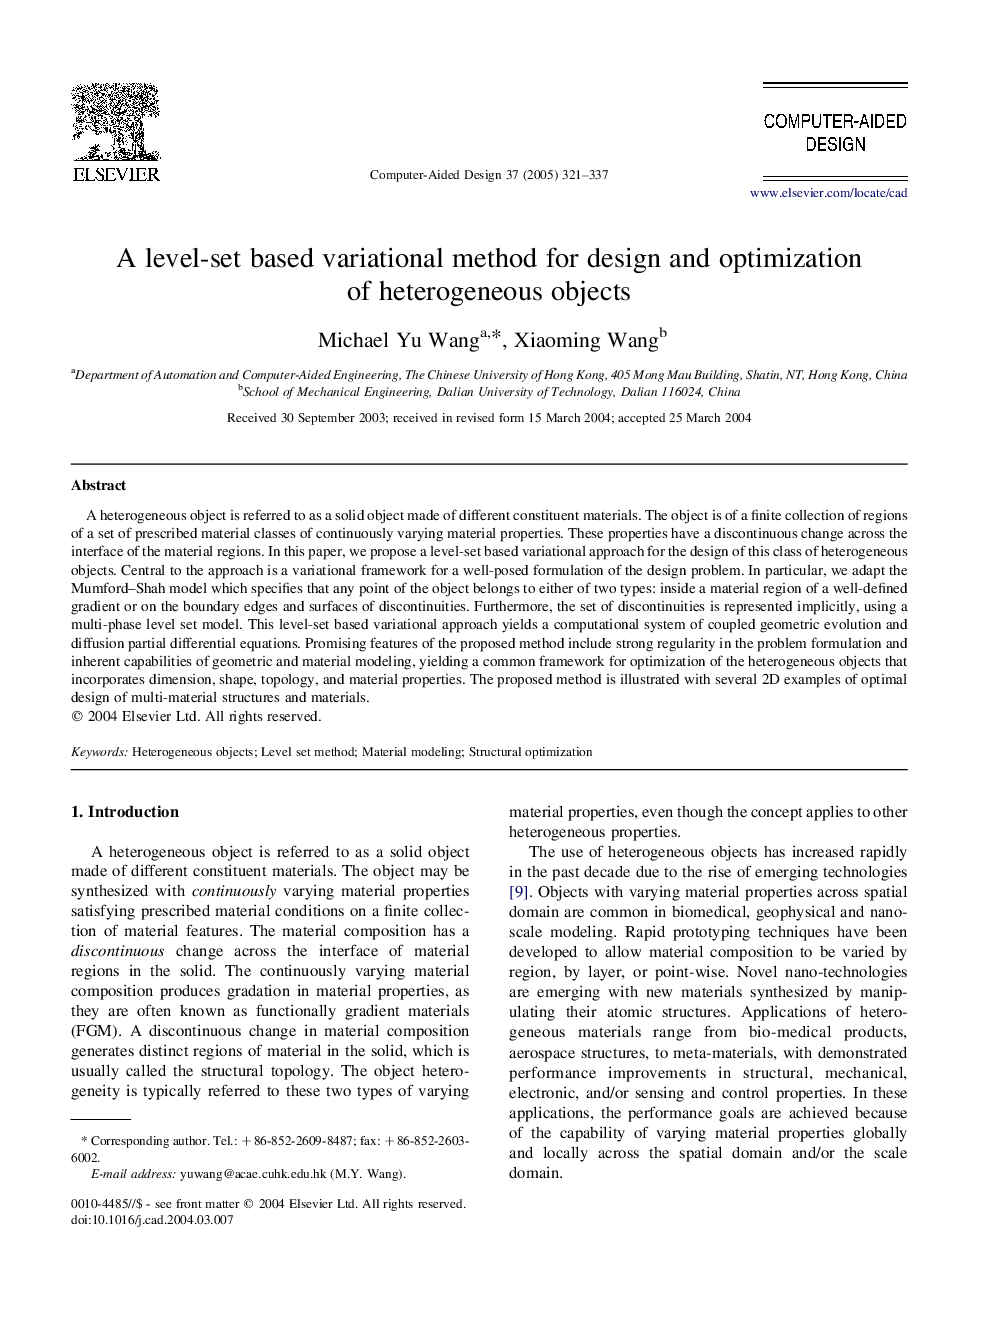 A level-set based variational method for design and optimization of heterogeneous objects